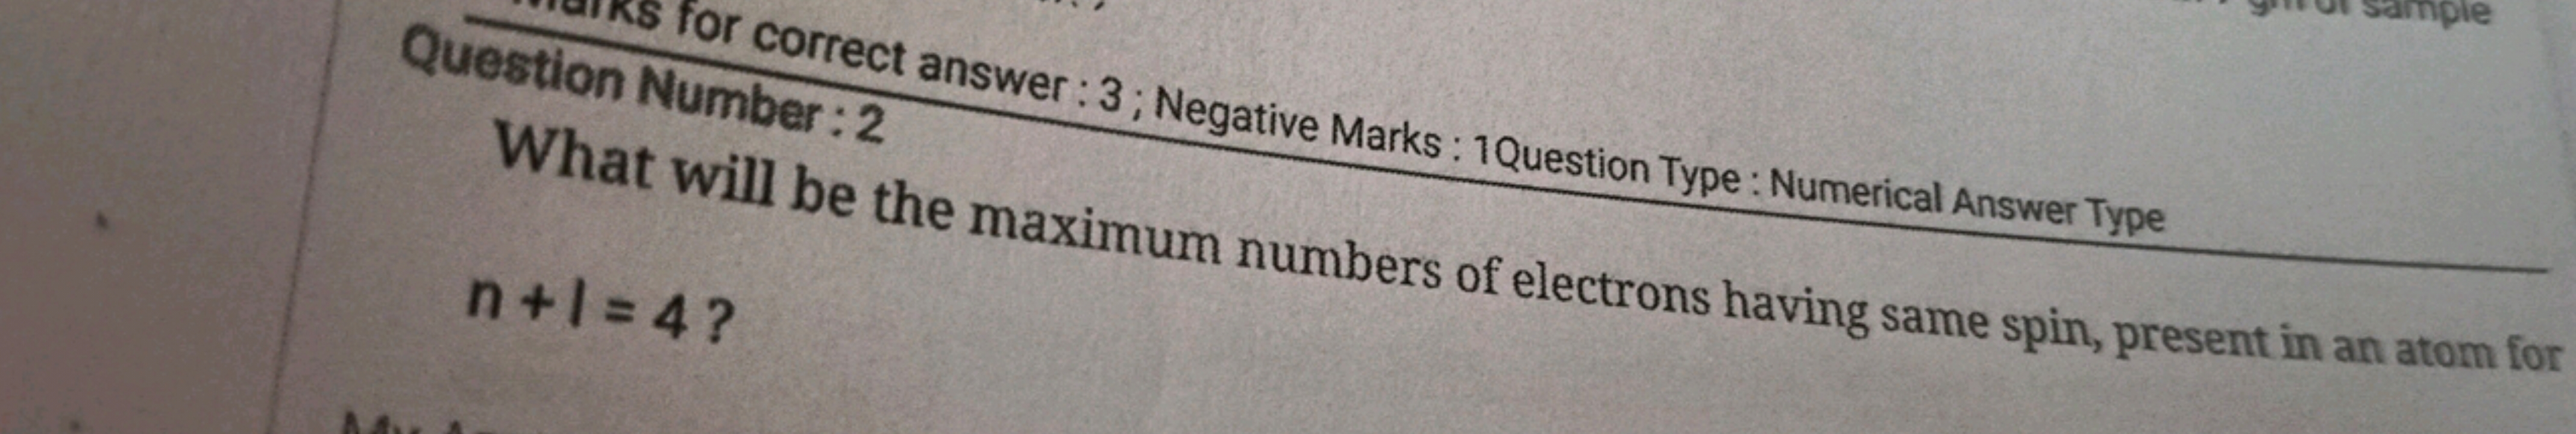 Question Number:2 answer : 3 ; Negative Marks : 1 Question Type : Nume